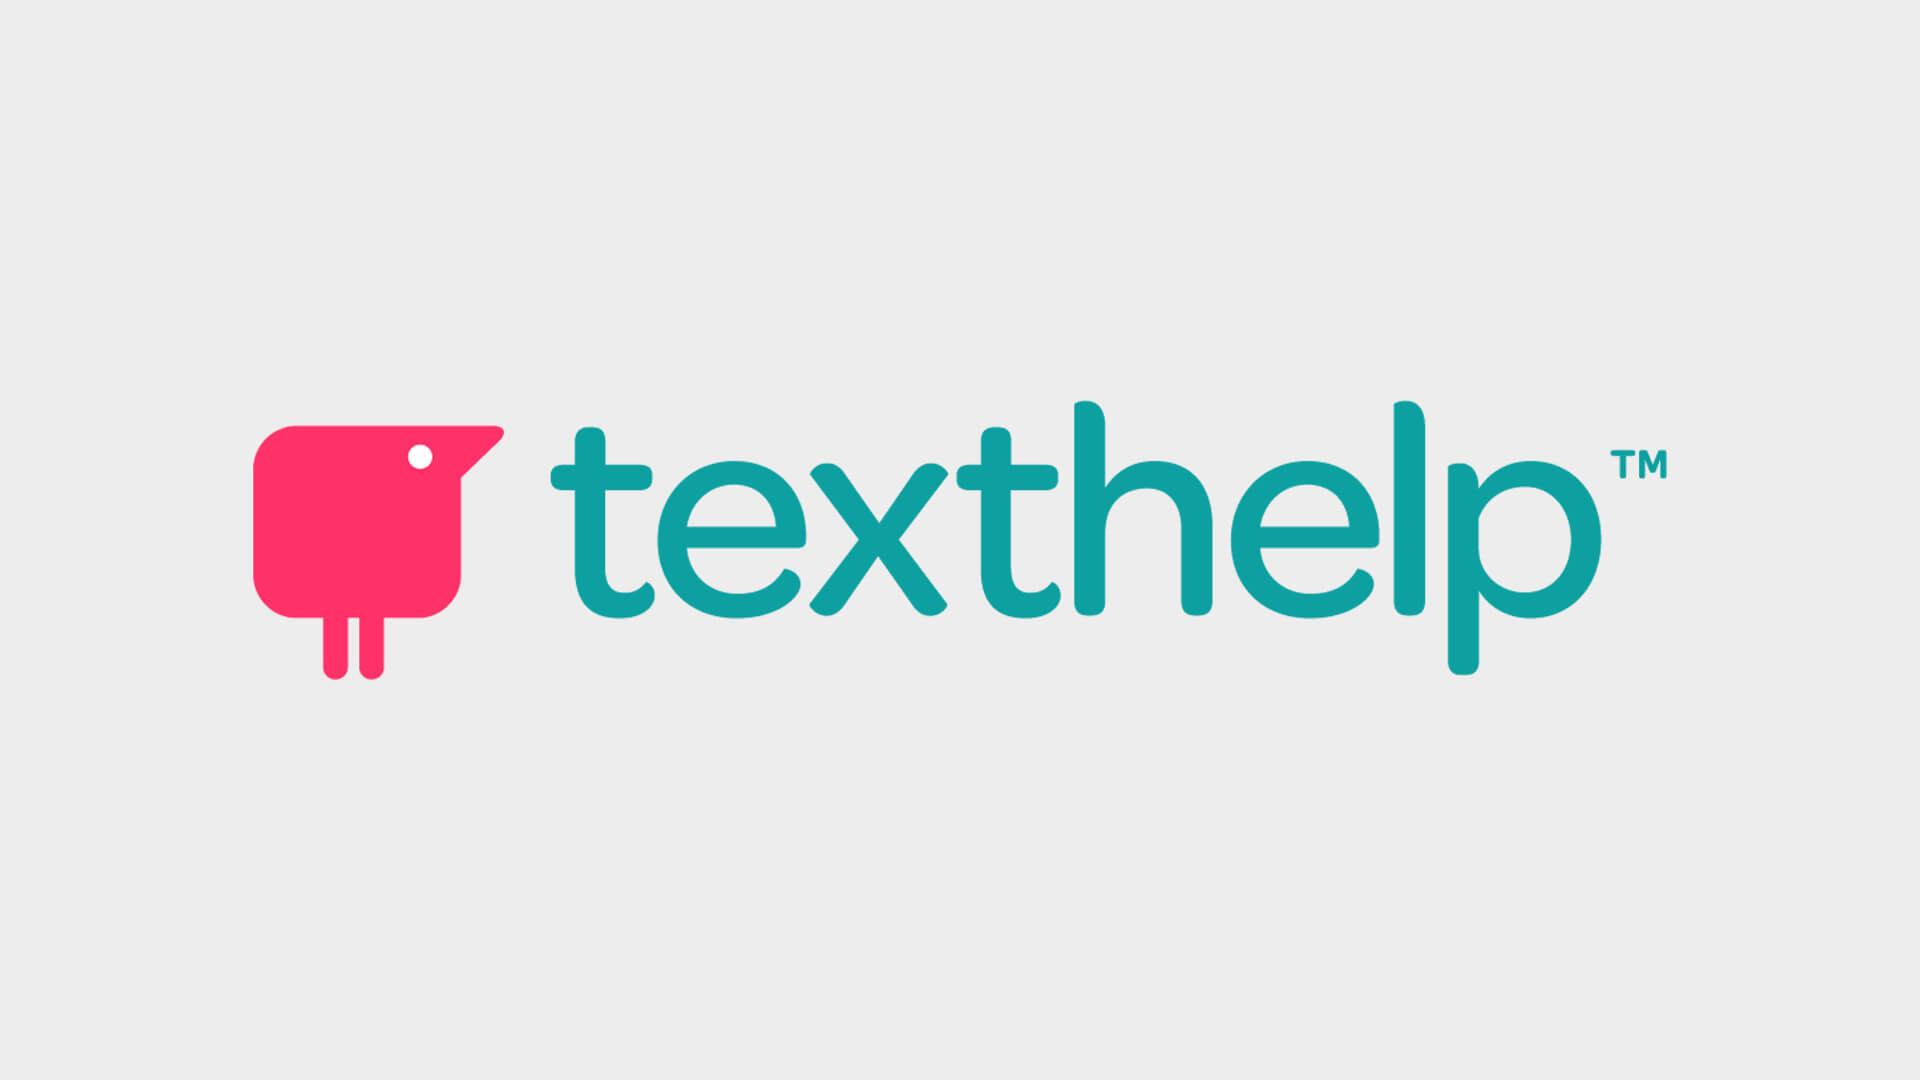 Click here to know more about Texthelp